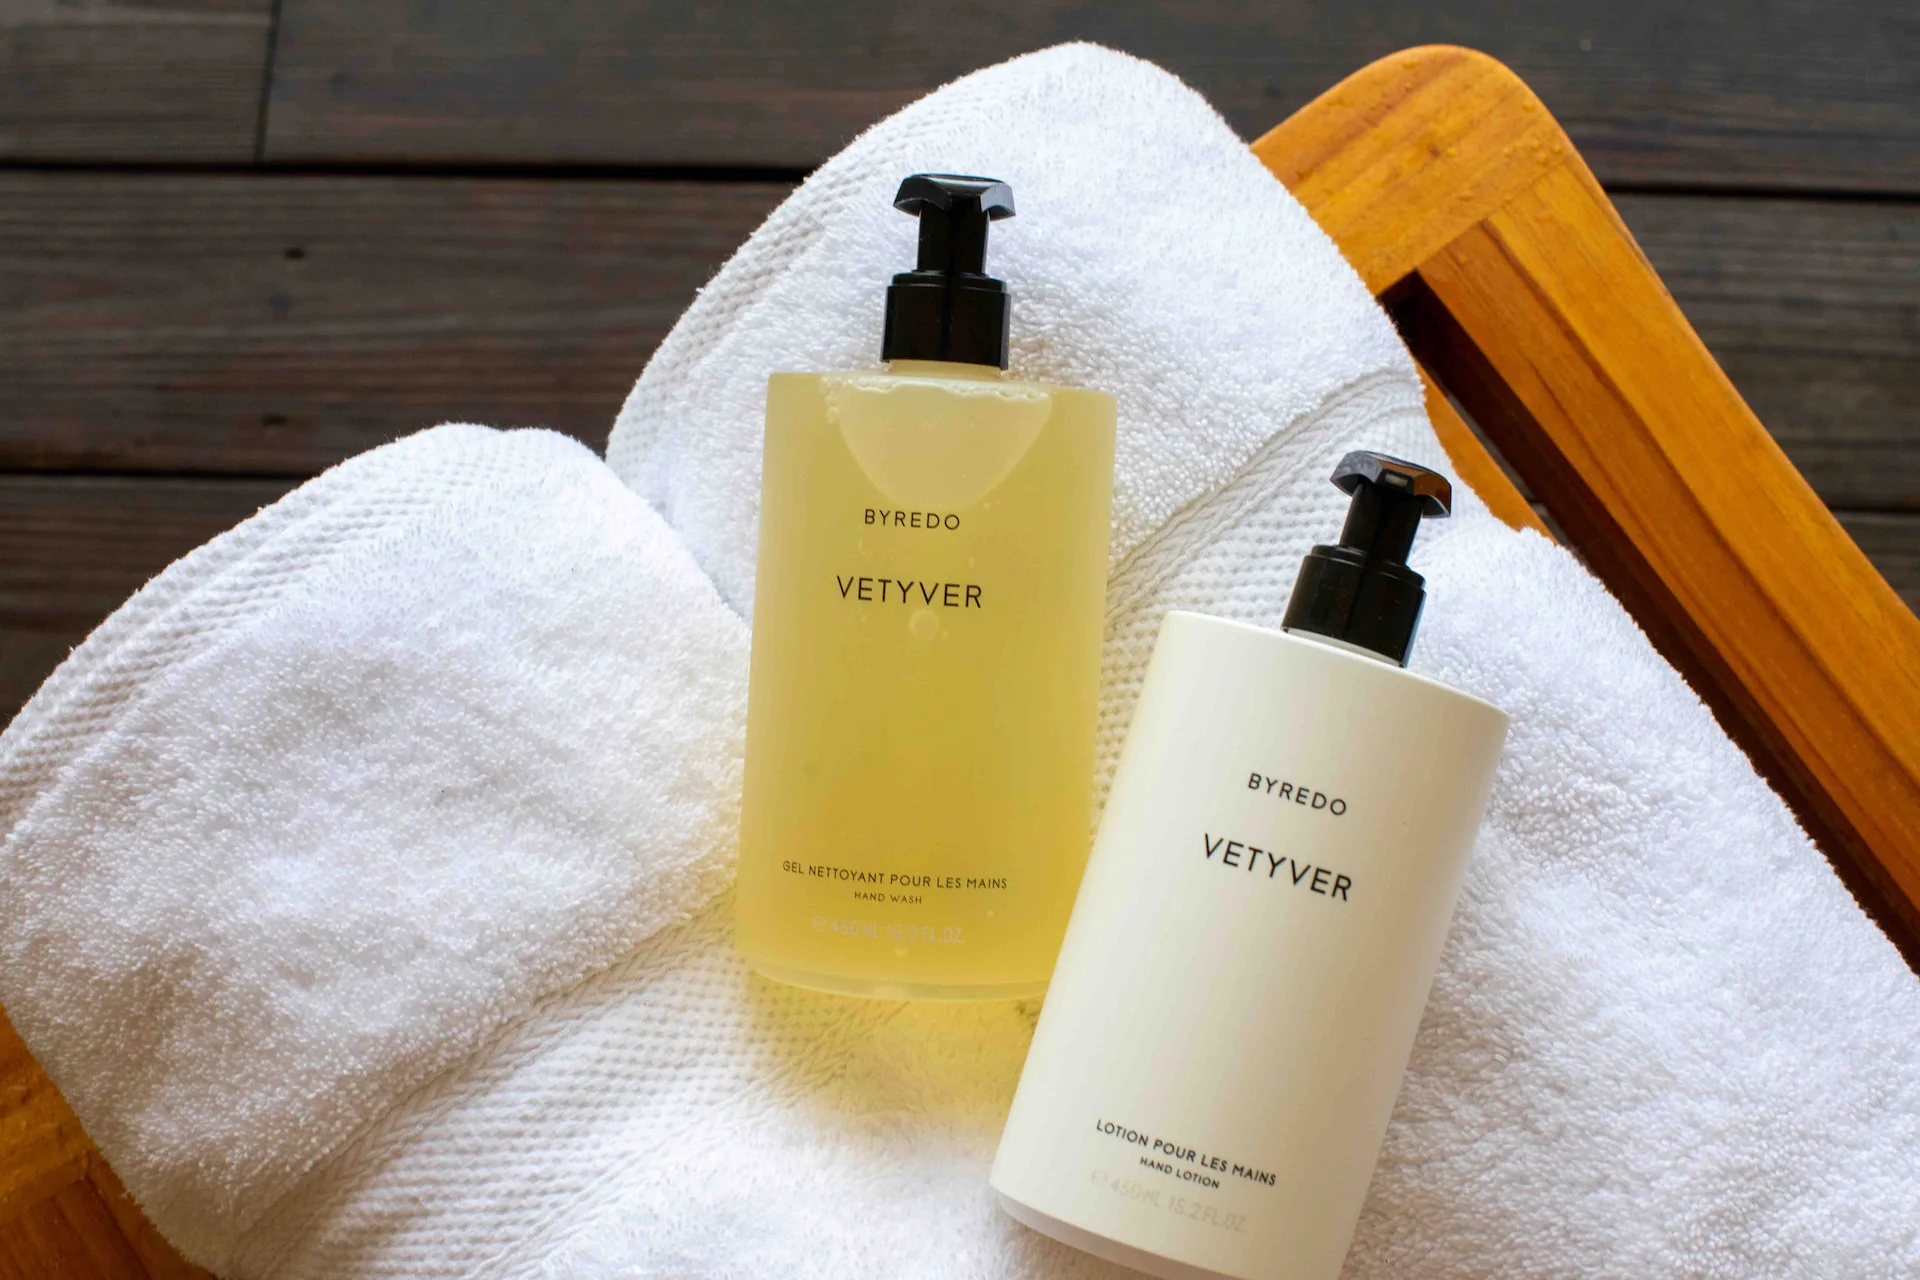 Byredo Vetyver hand lotion and hand wash gel